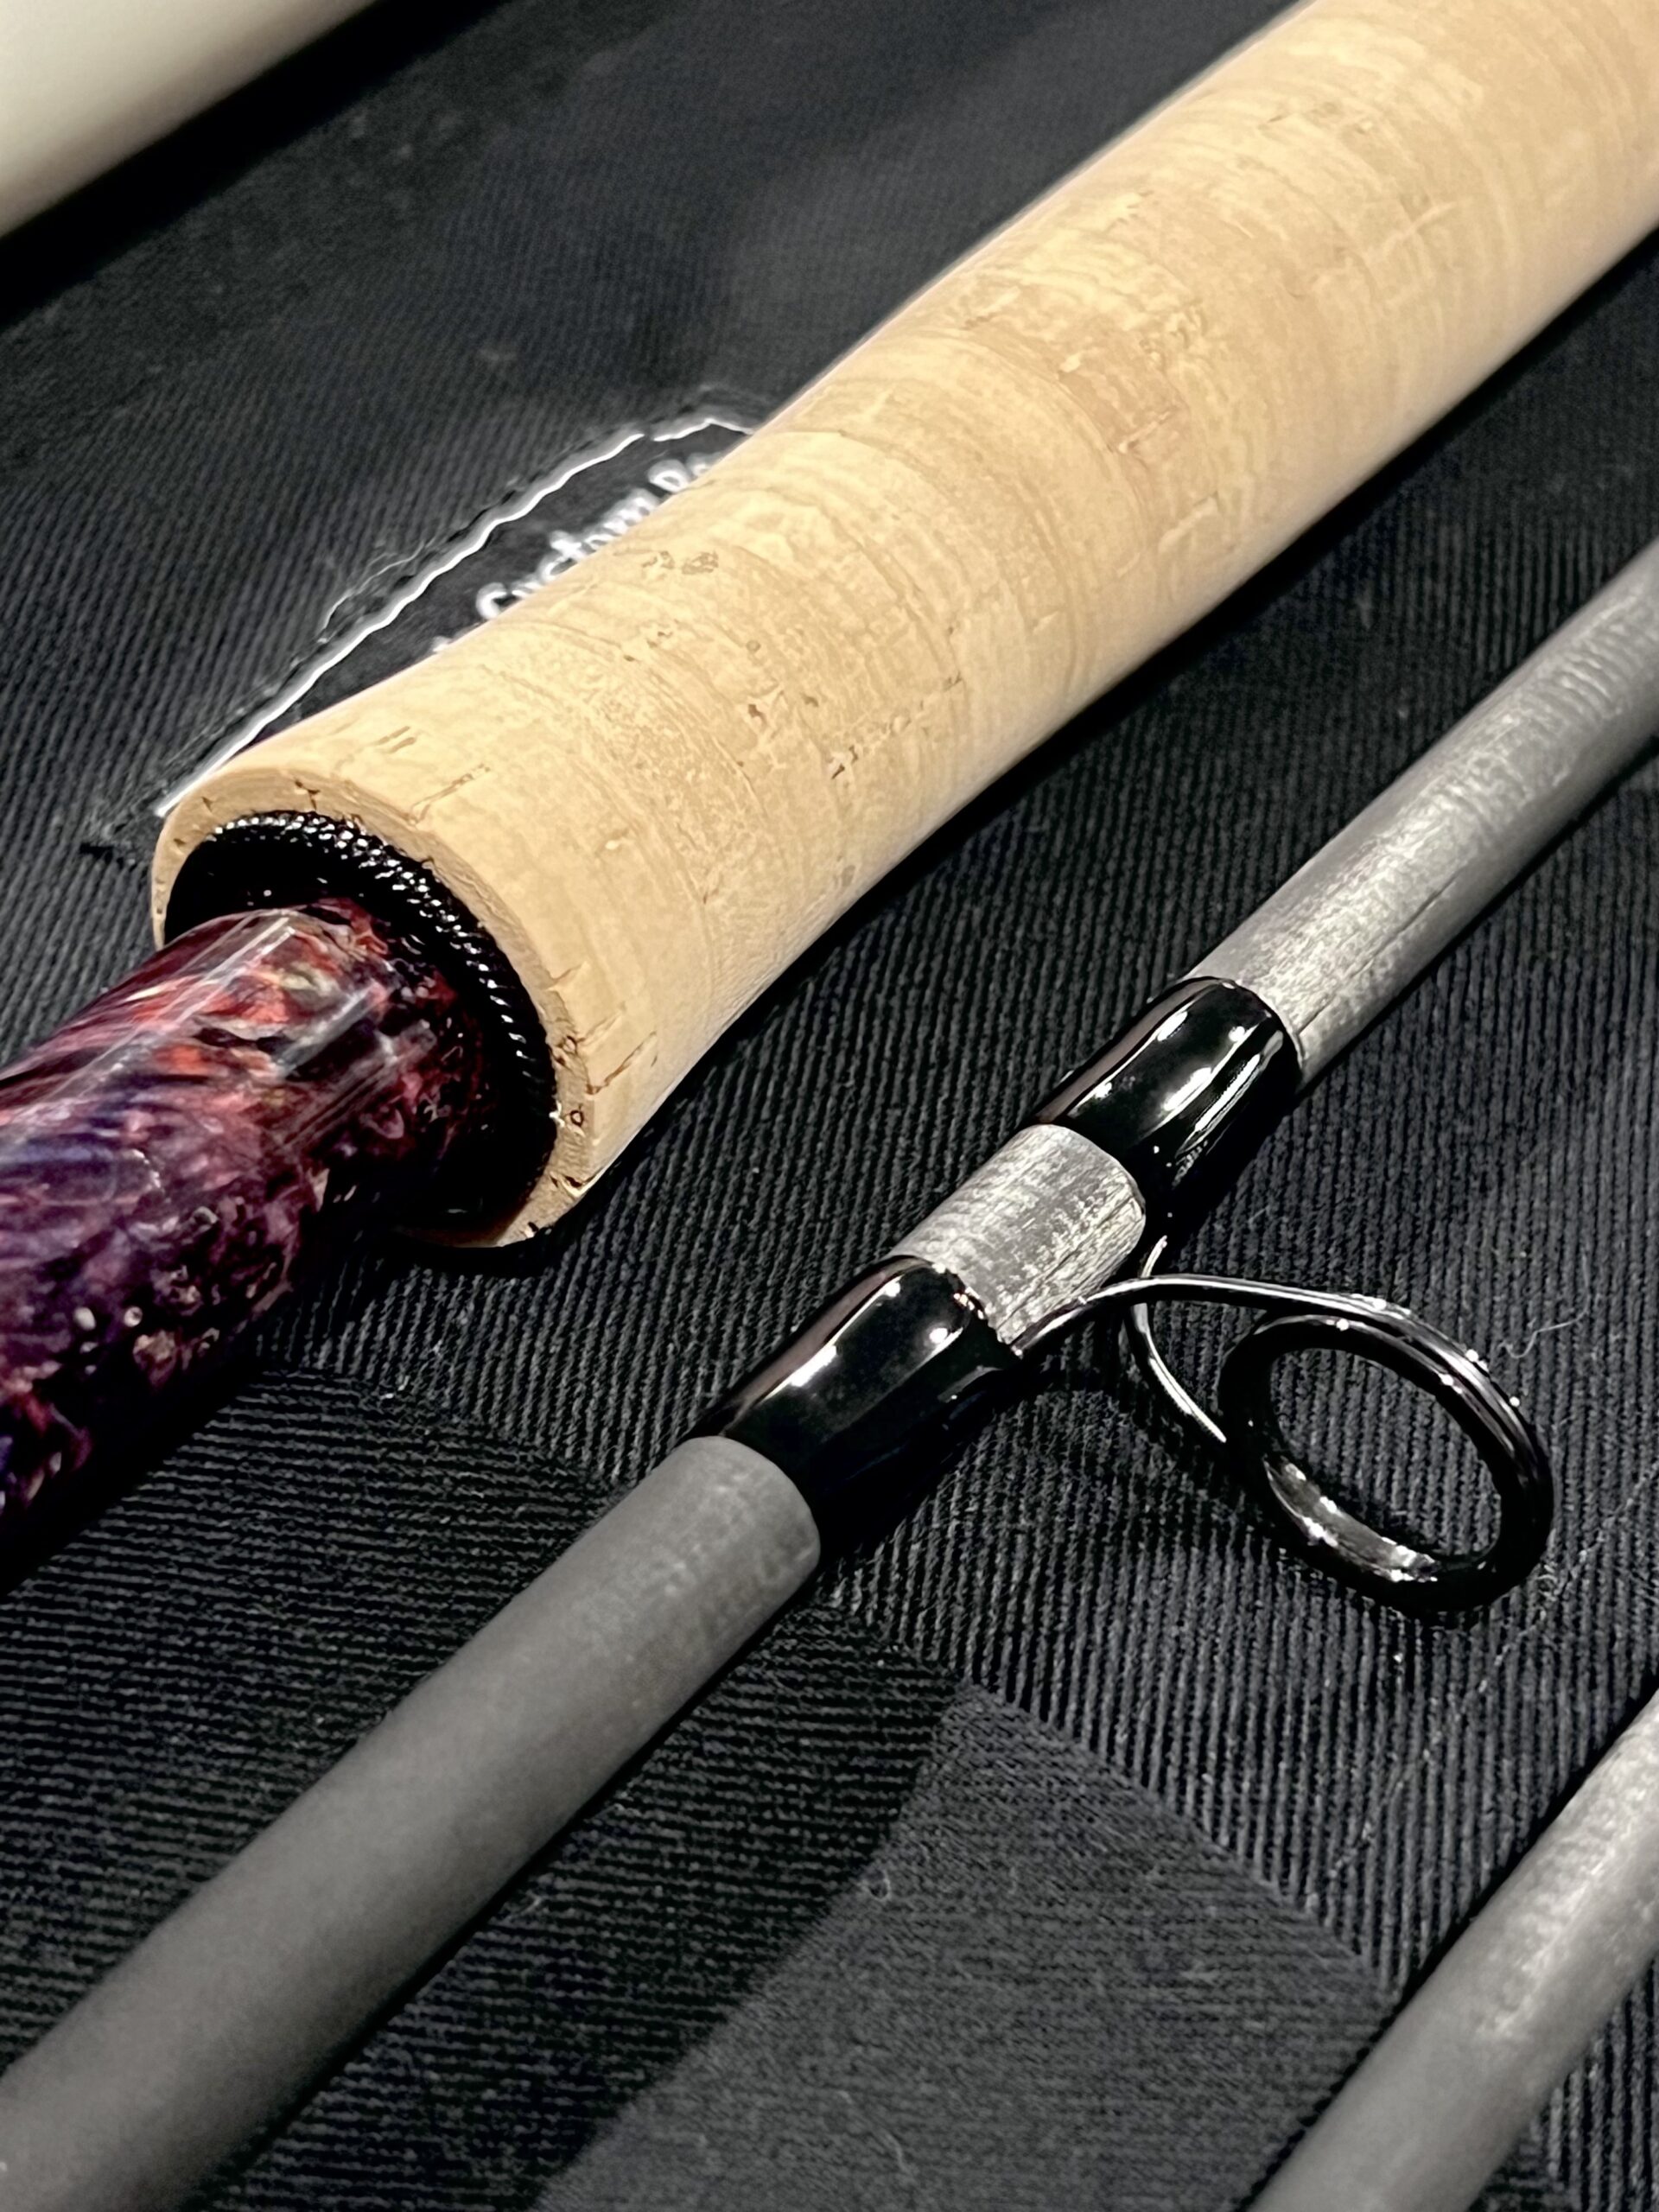 The EDGE Gamma Beta fly rods redefine top performance (I